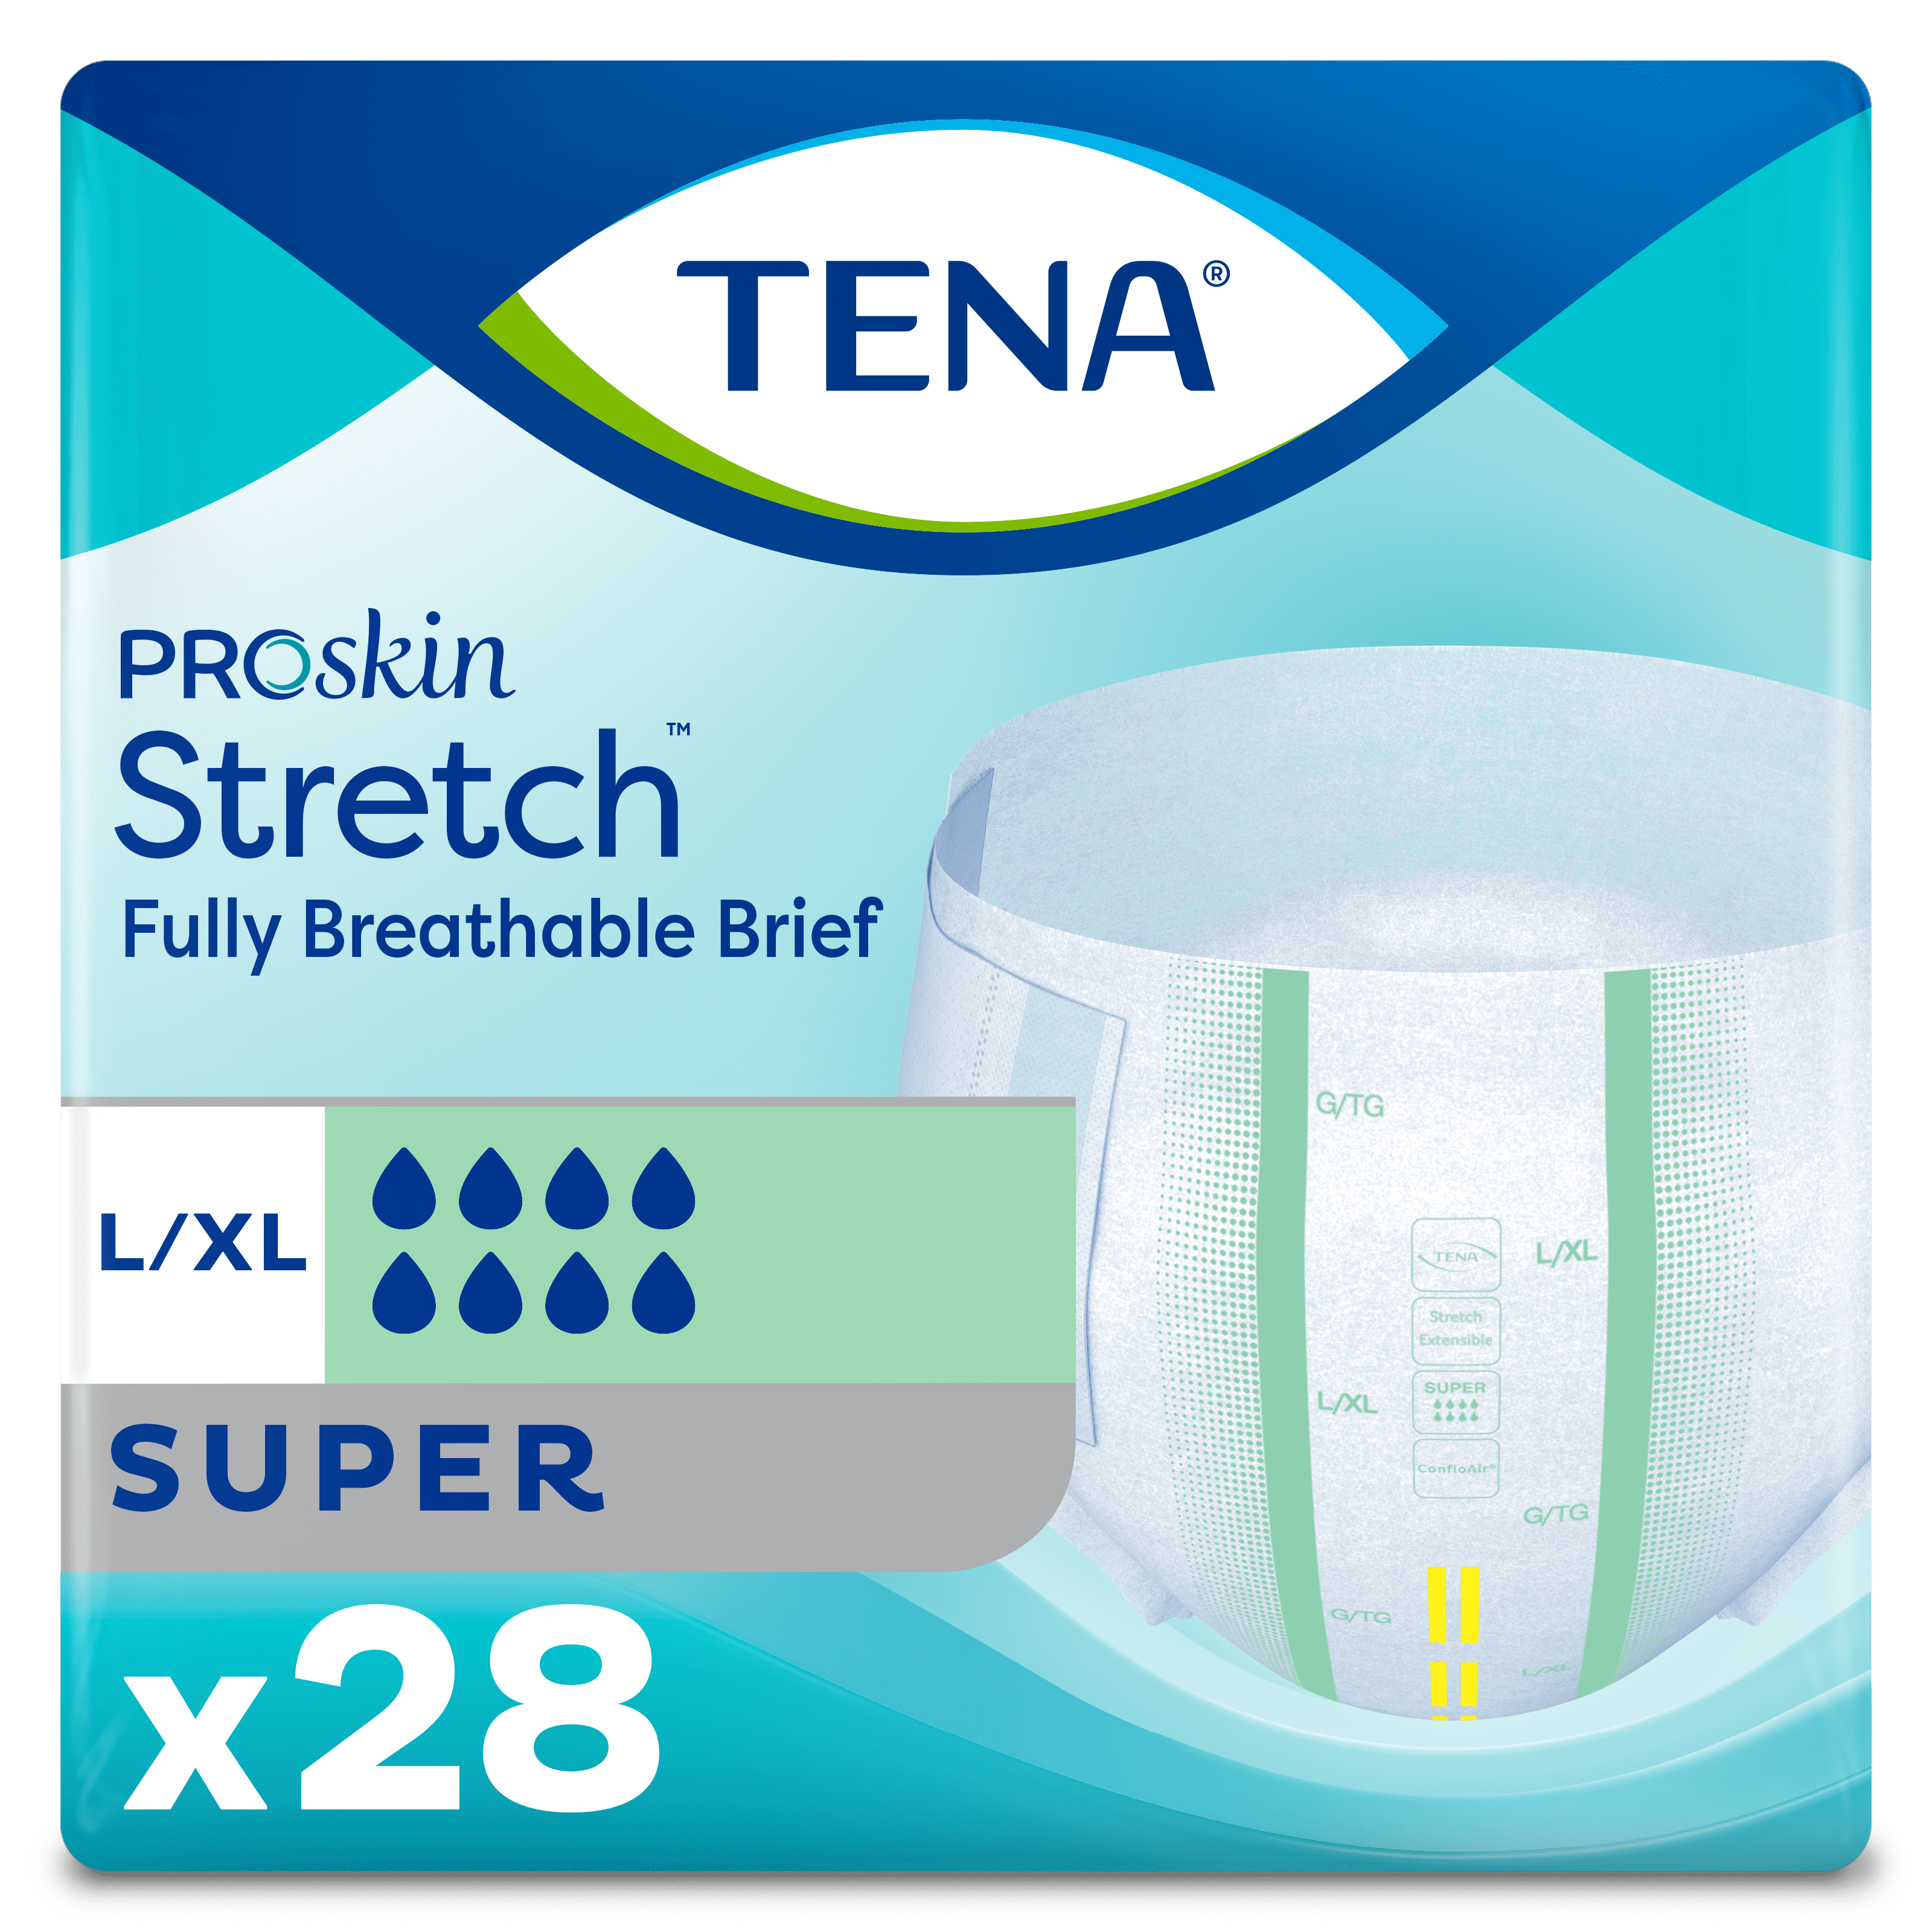 TENA ProSkin Stretch Super Briefs | Fully Breathable, Unisex, Large/X-Large